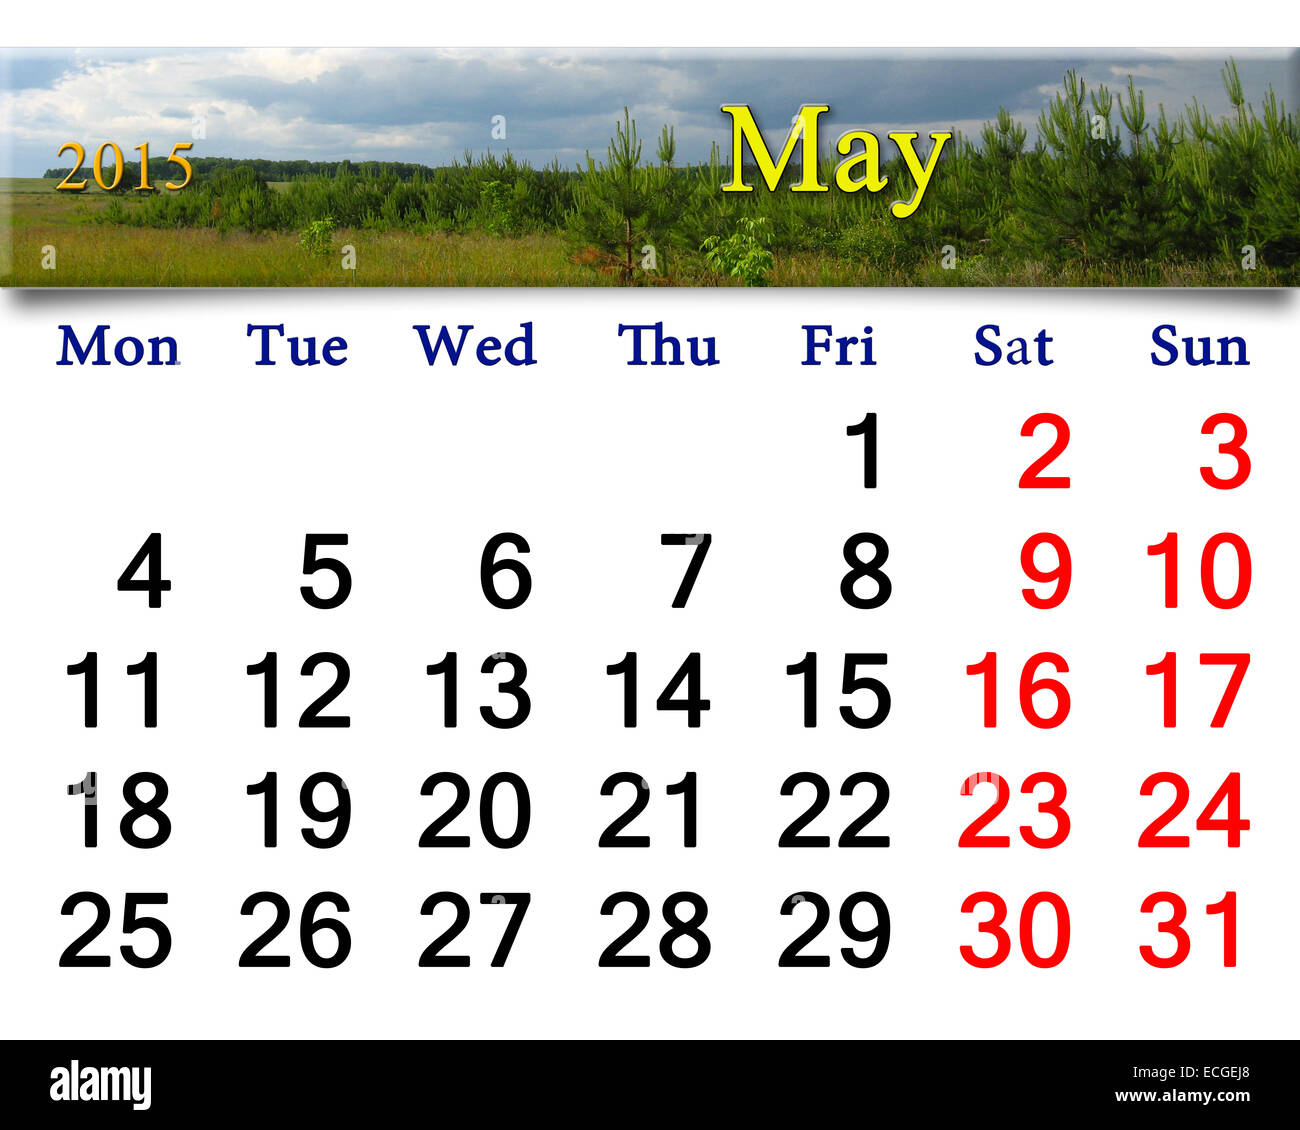 calendar for May of 2015 on the background of thunder storm clouds and pines Stock Photo